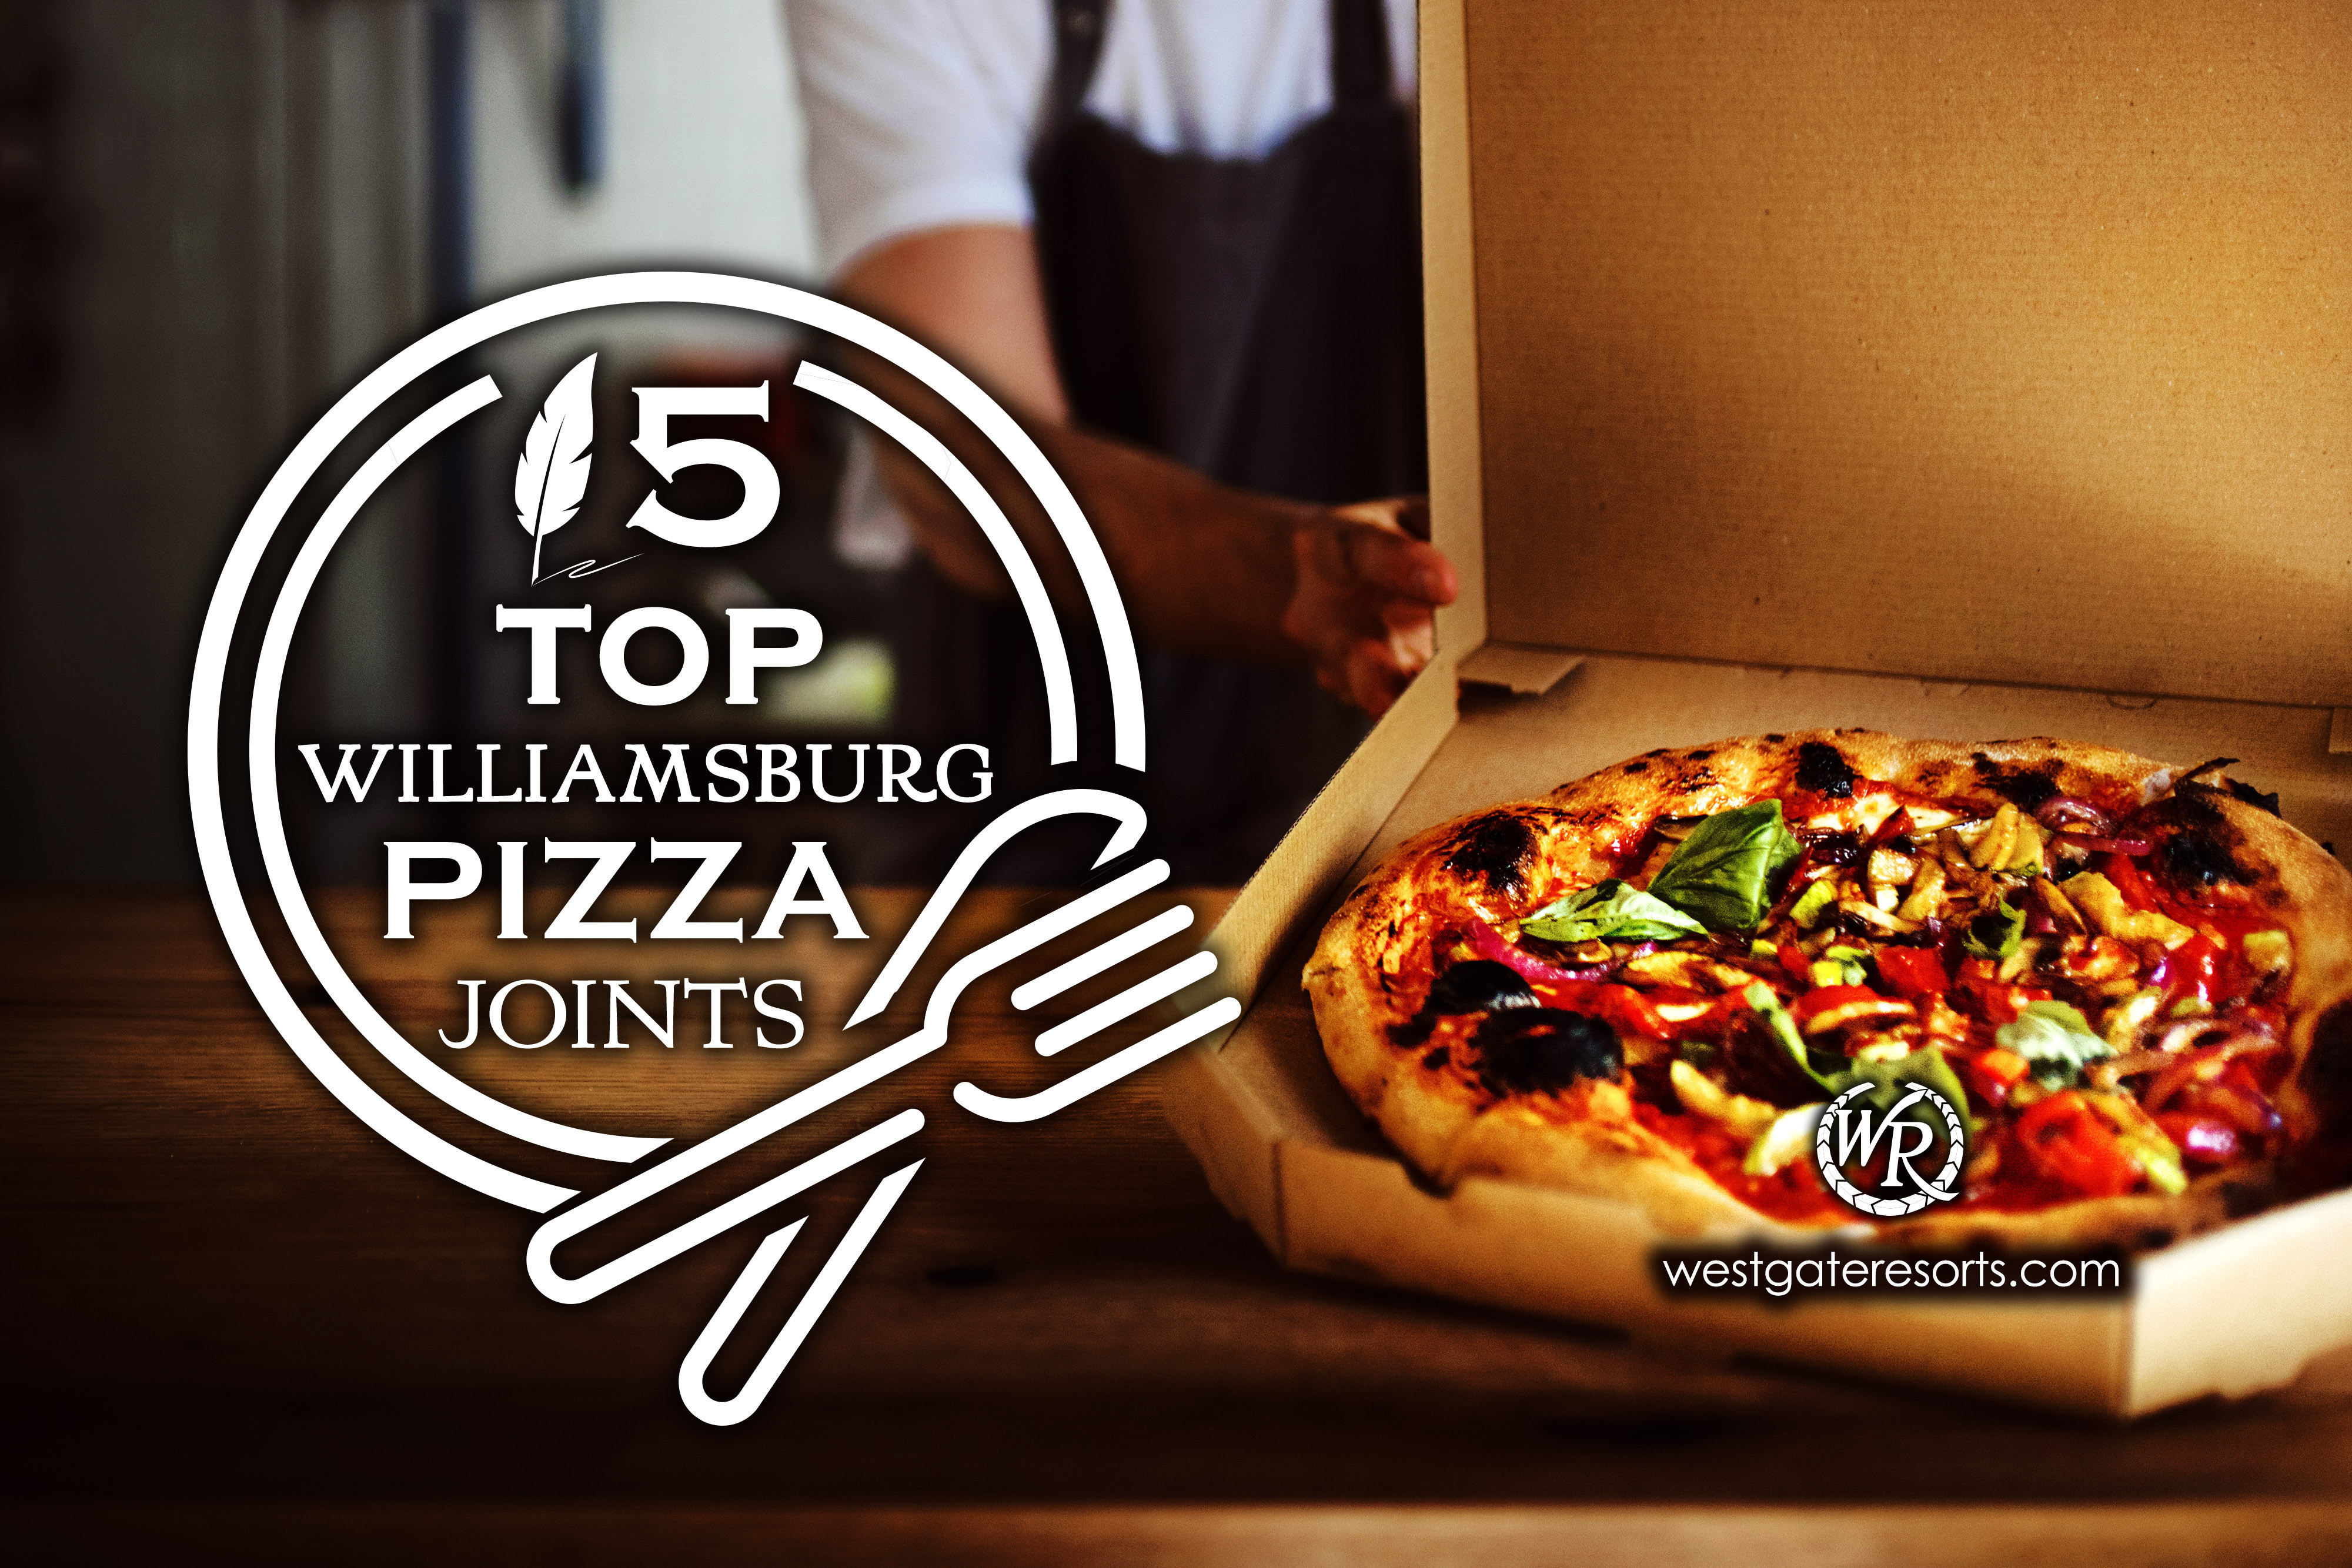 15 Top Williamsburg Pizza Joints That Will Make Your Mouth Water!